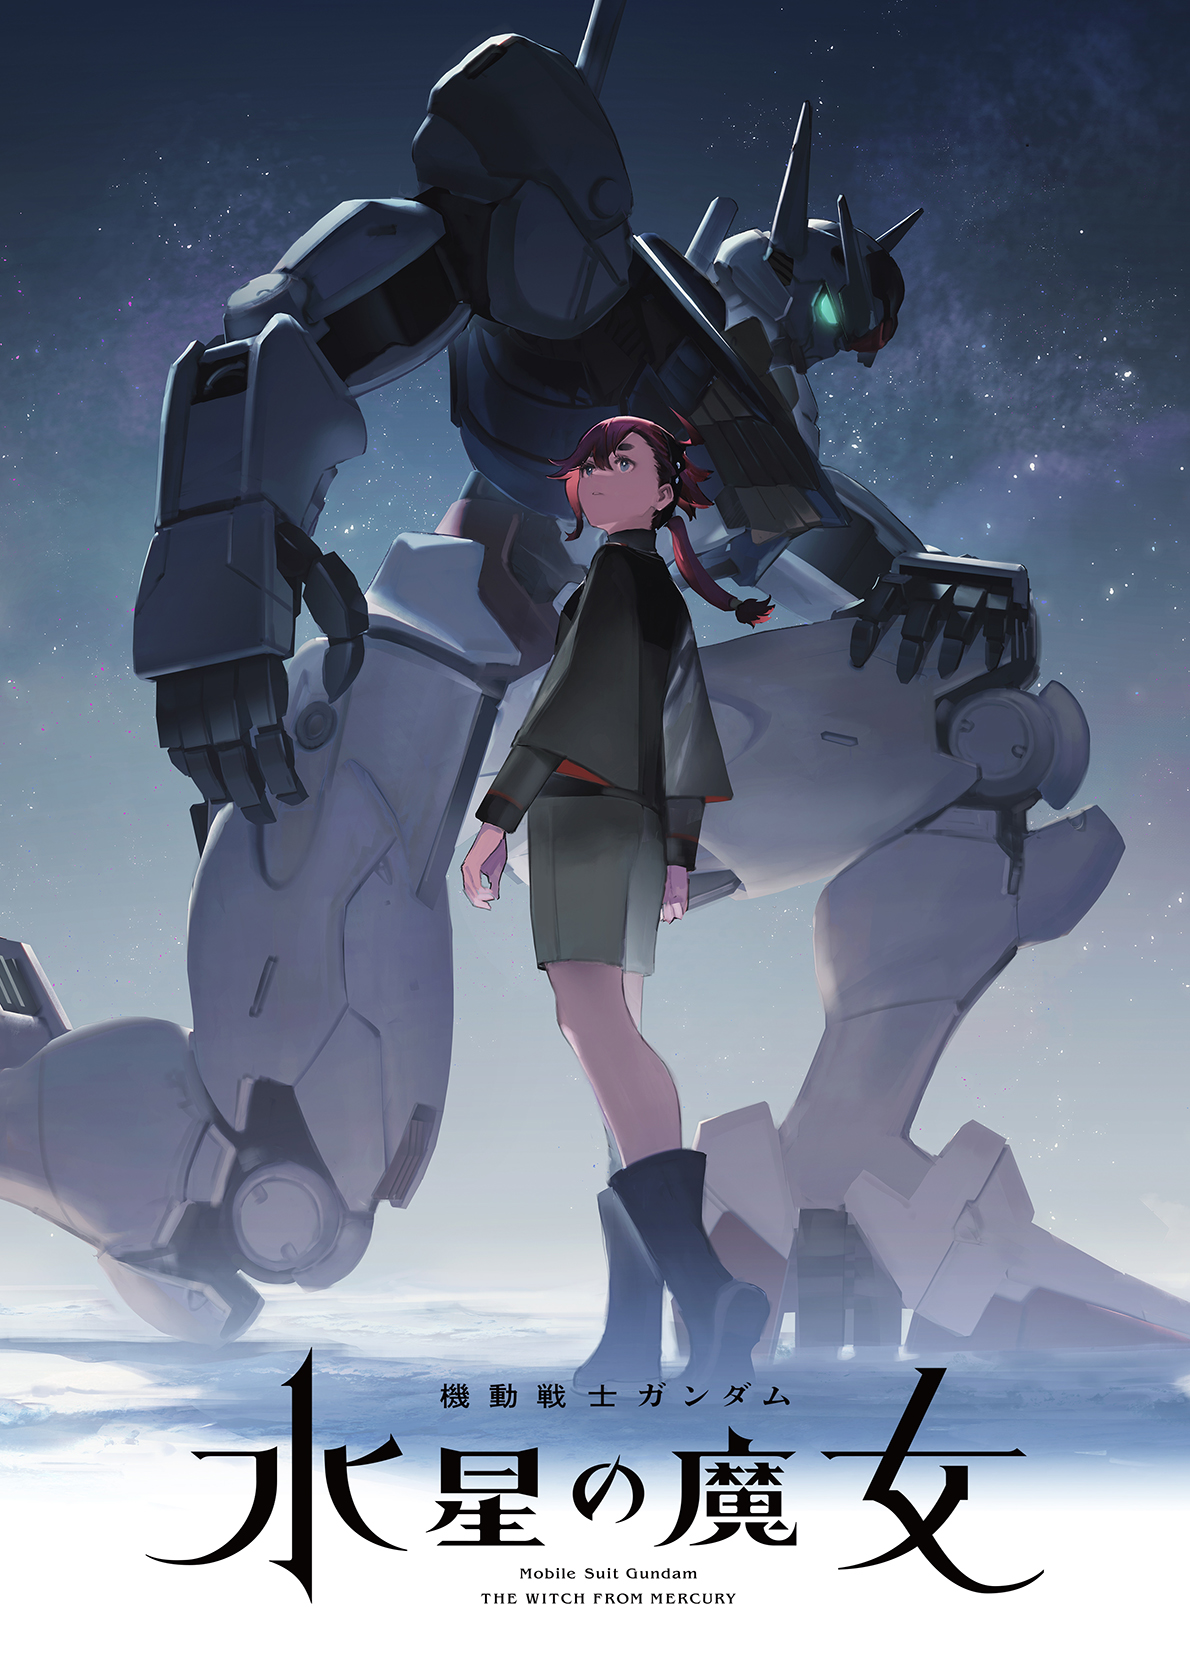 Upcoming Anime: Mobile Suit Gundam The Witch from Mercury